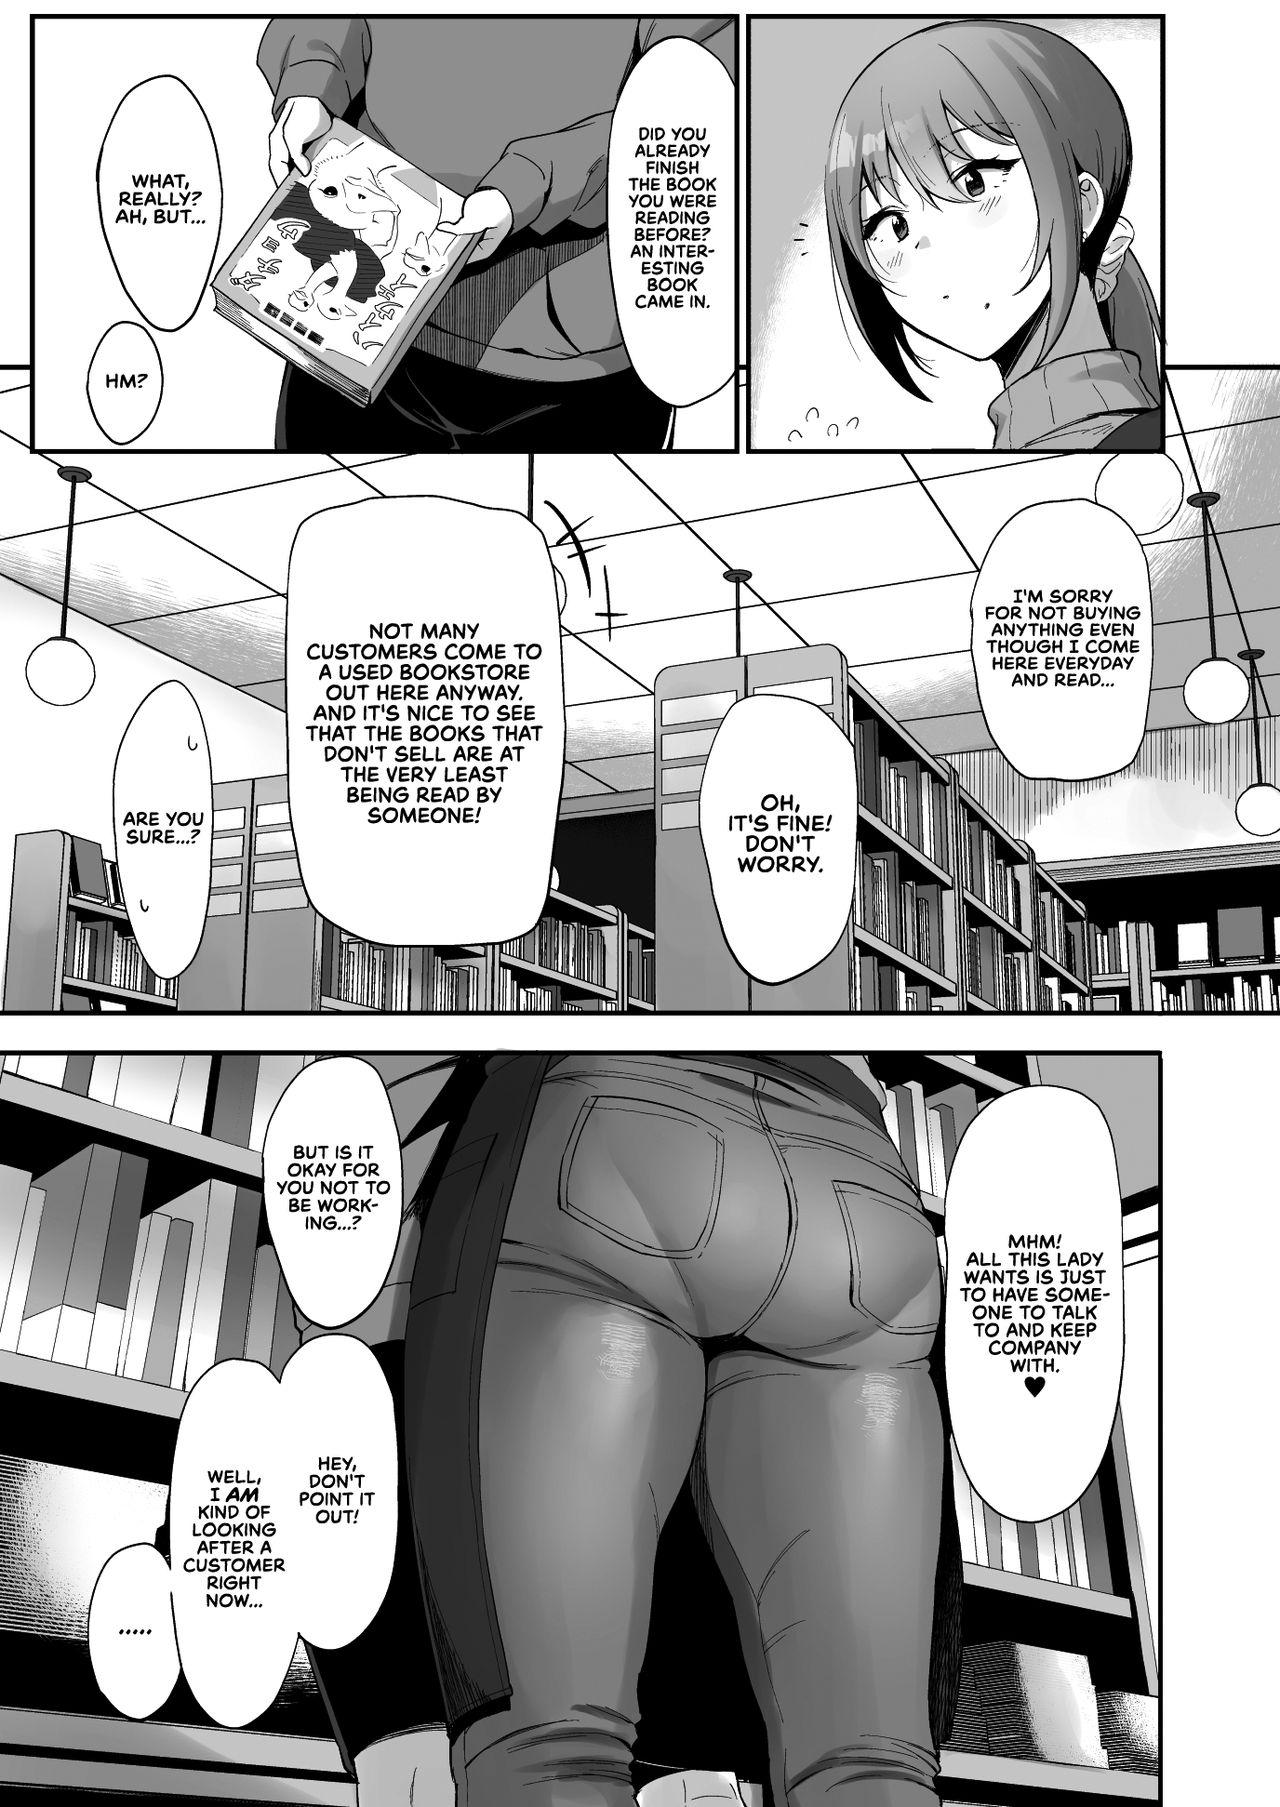 Spy Camera Furuhonya no Onee-san to | With The Lady From The Used Book Shop - Original Big Cock - Page 6